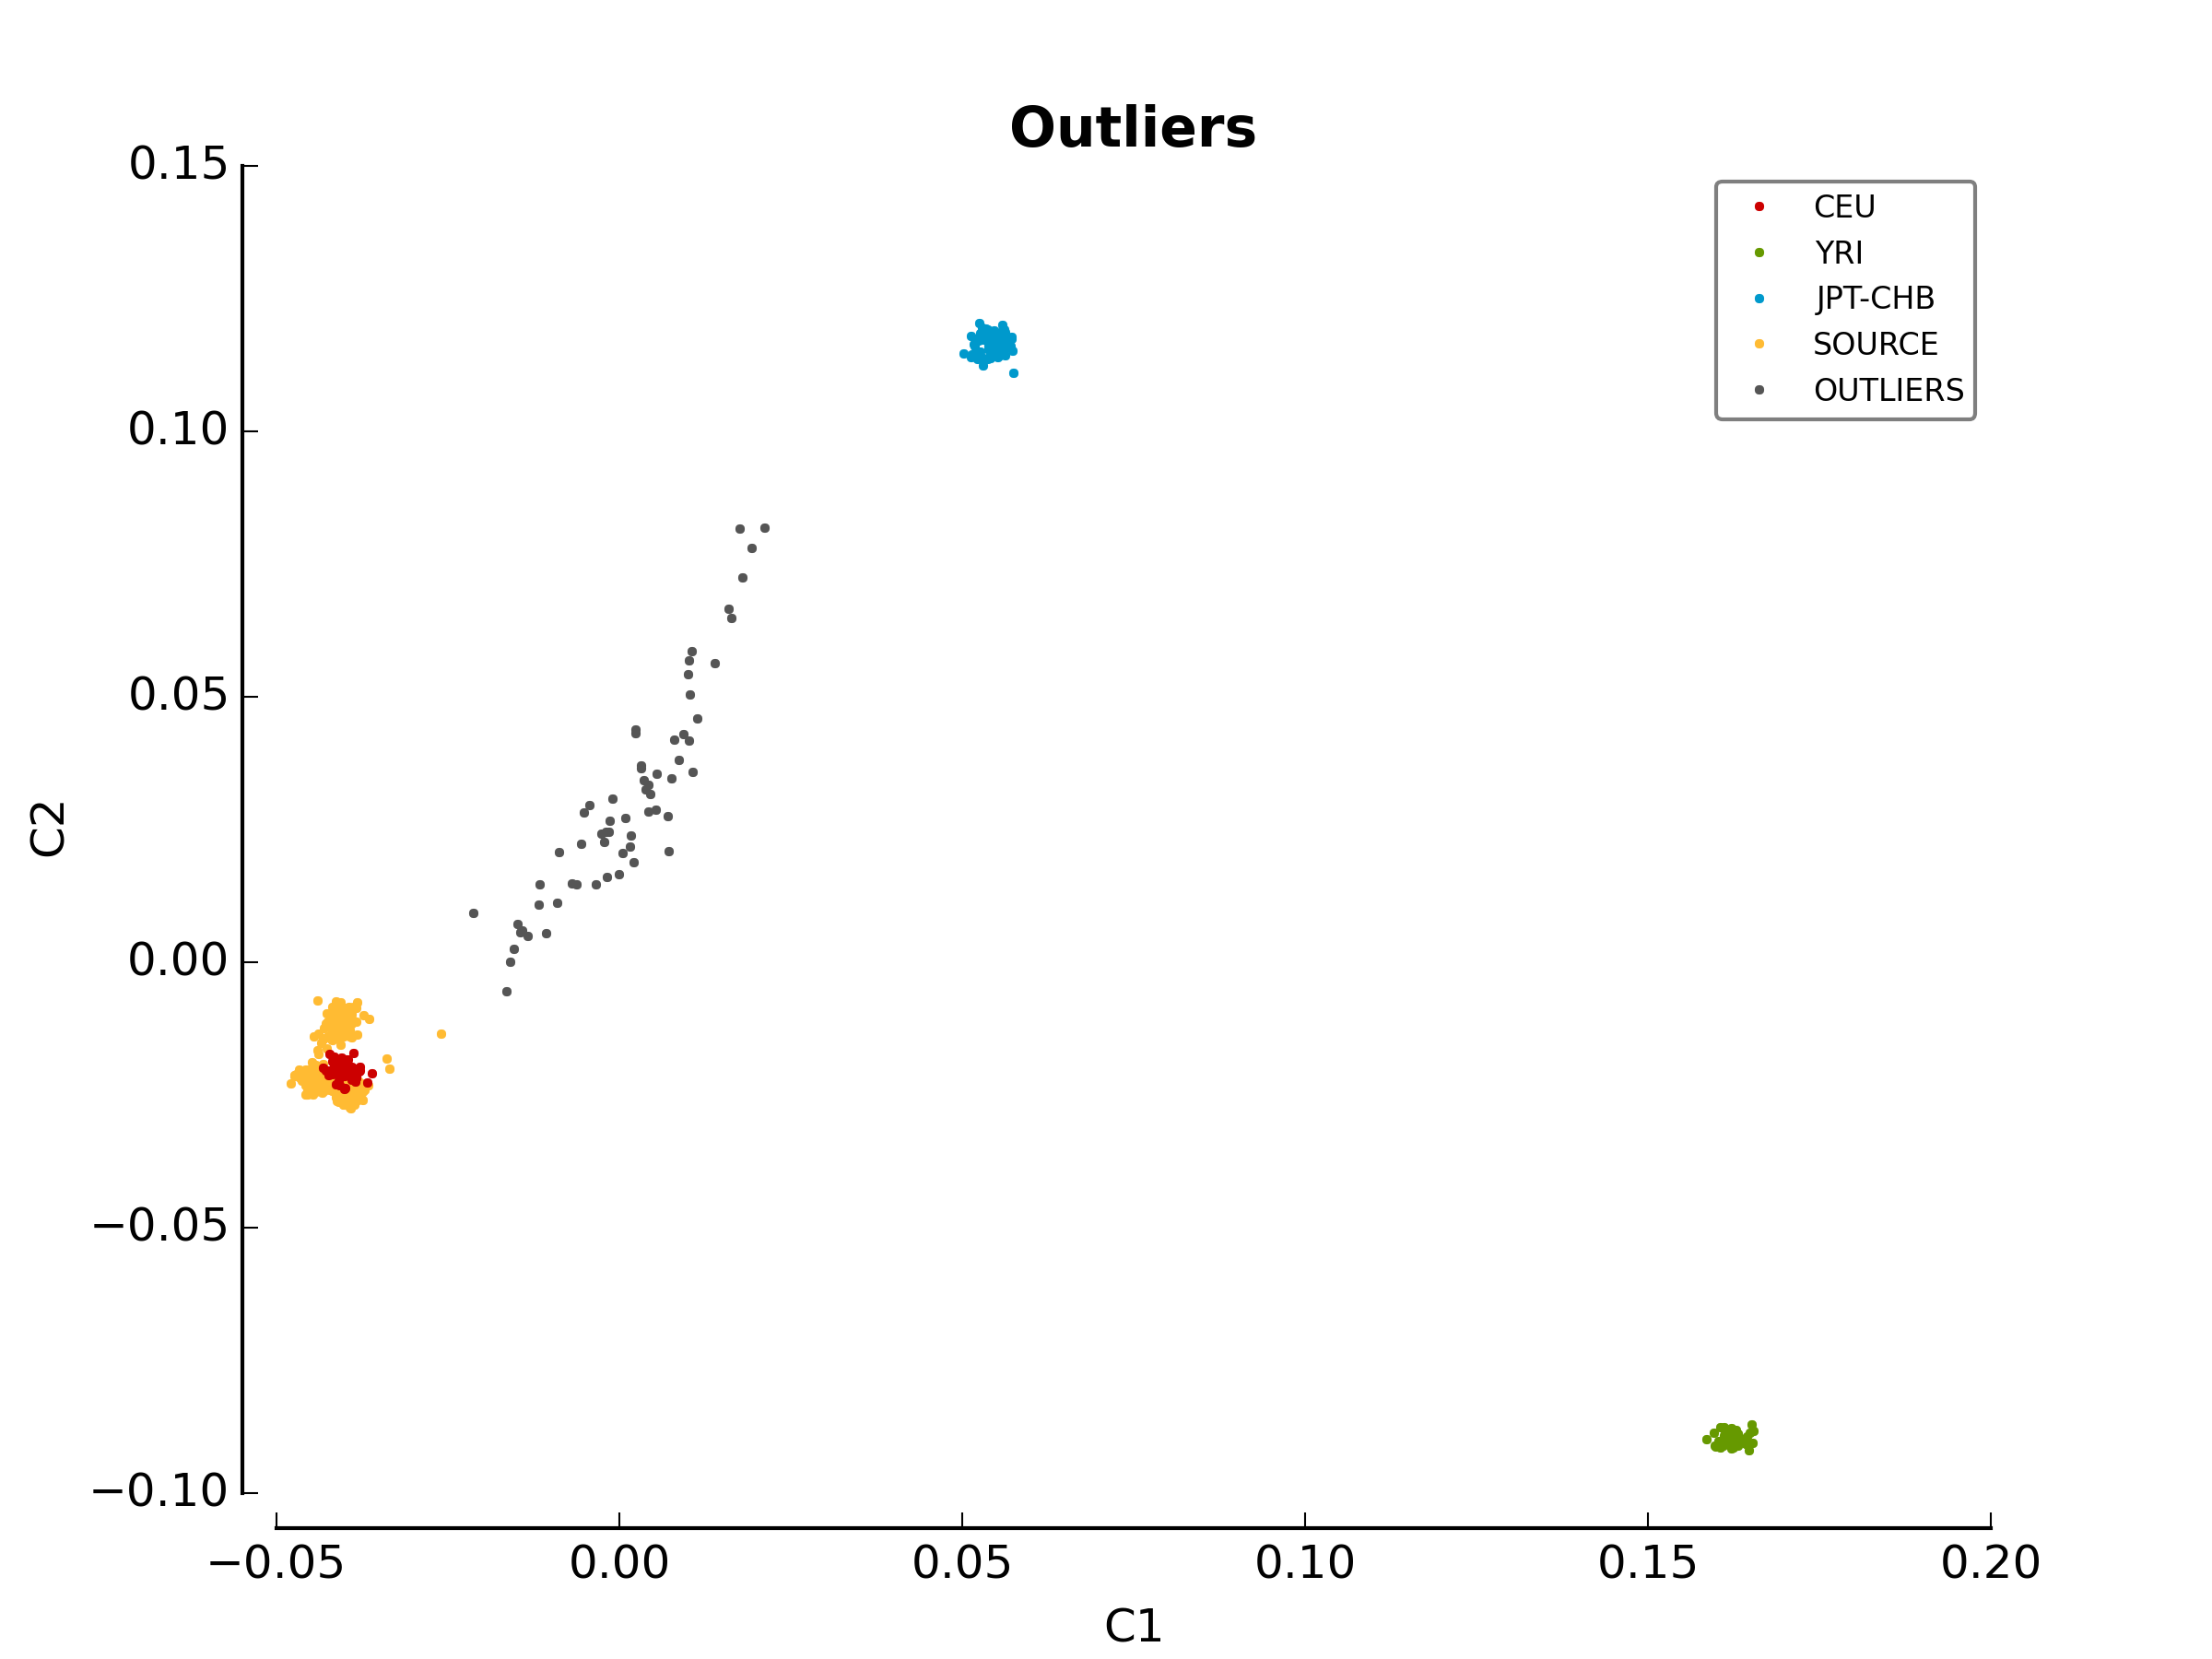 Ethnic After Outliers